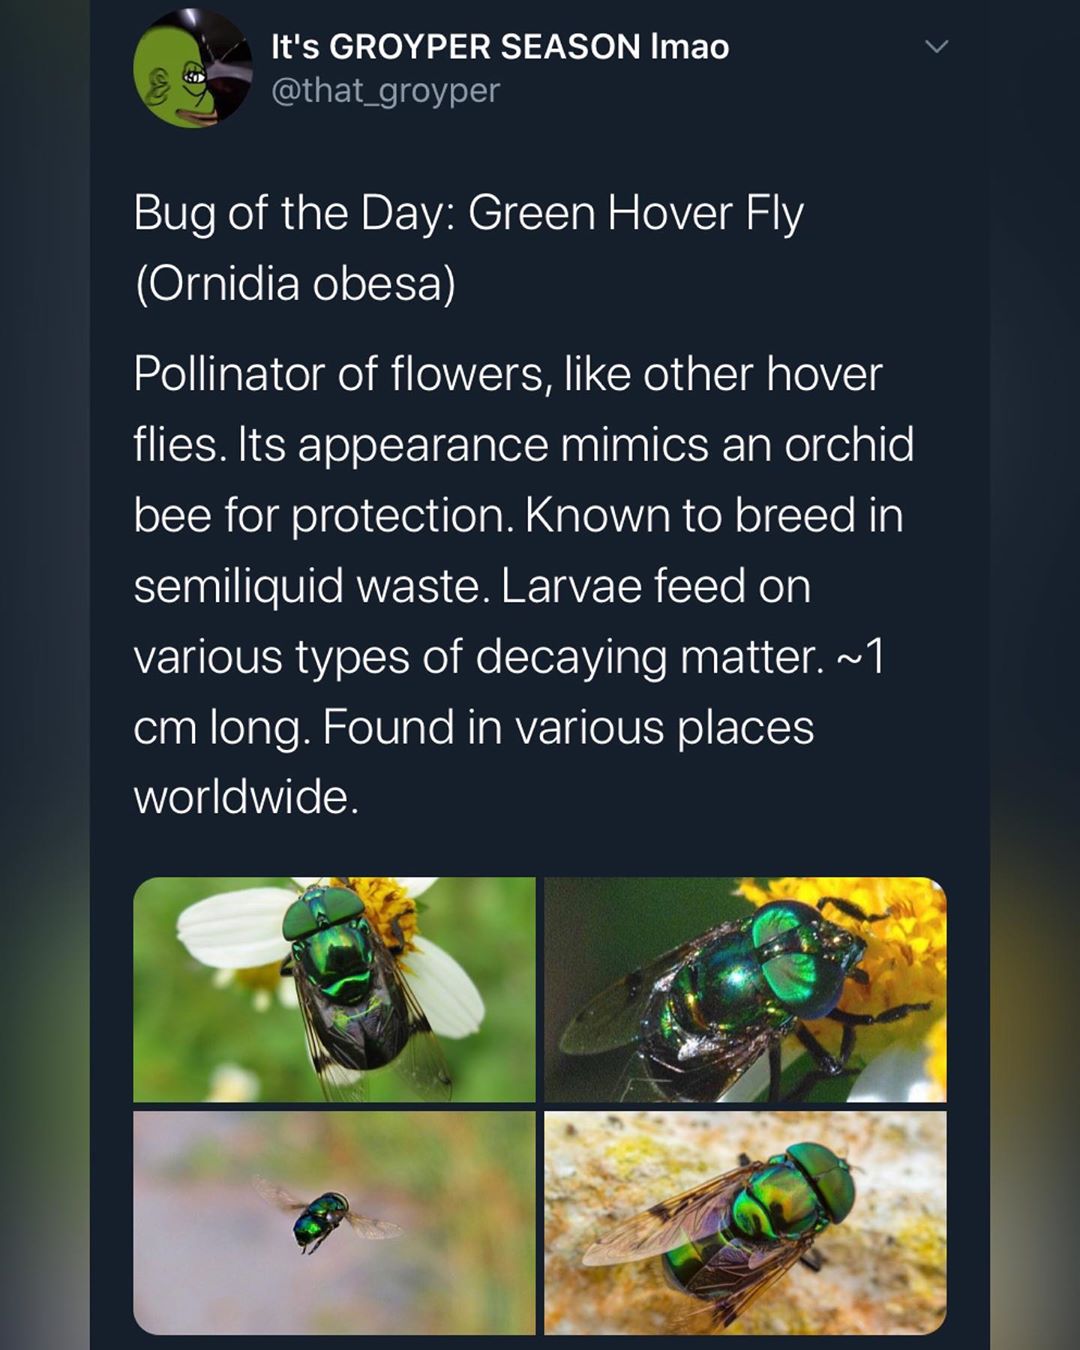 You are currently viewing [New] Bug of the Day
The Green Hover Fly
Or The (((Jewel))) Fly
#GroyperSeason…